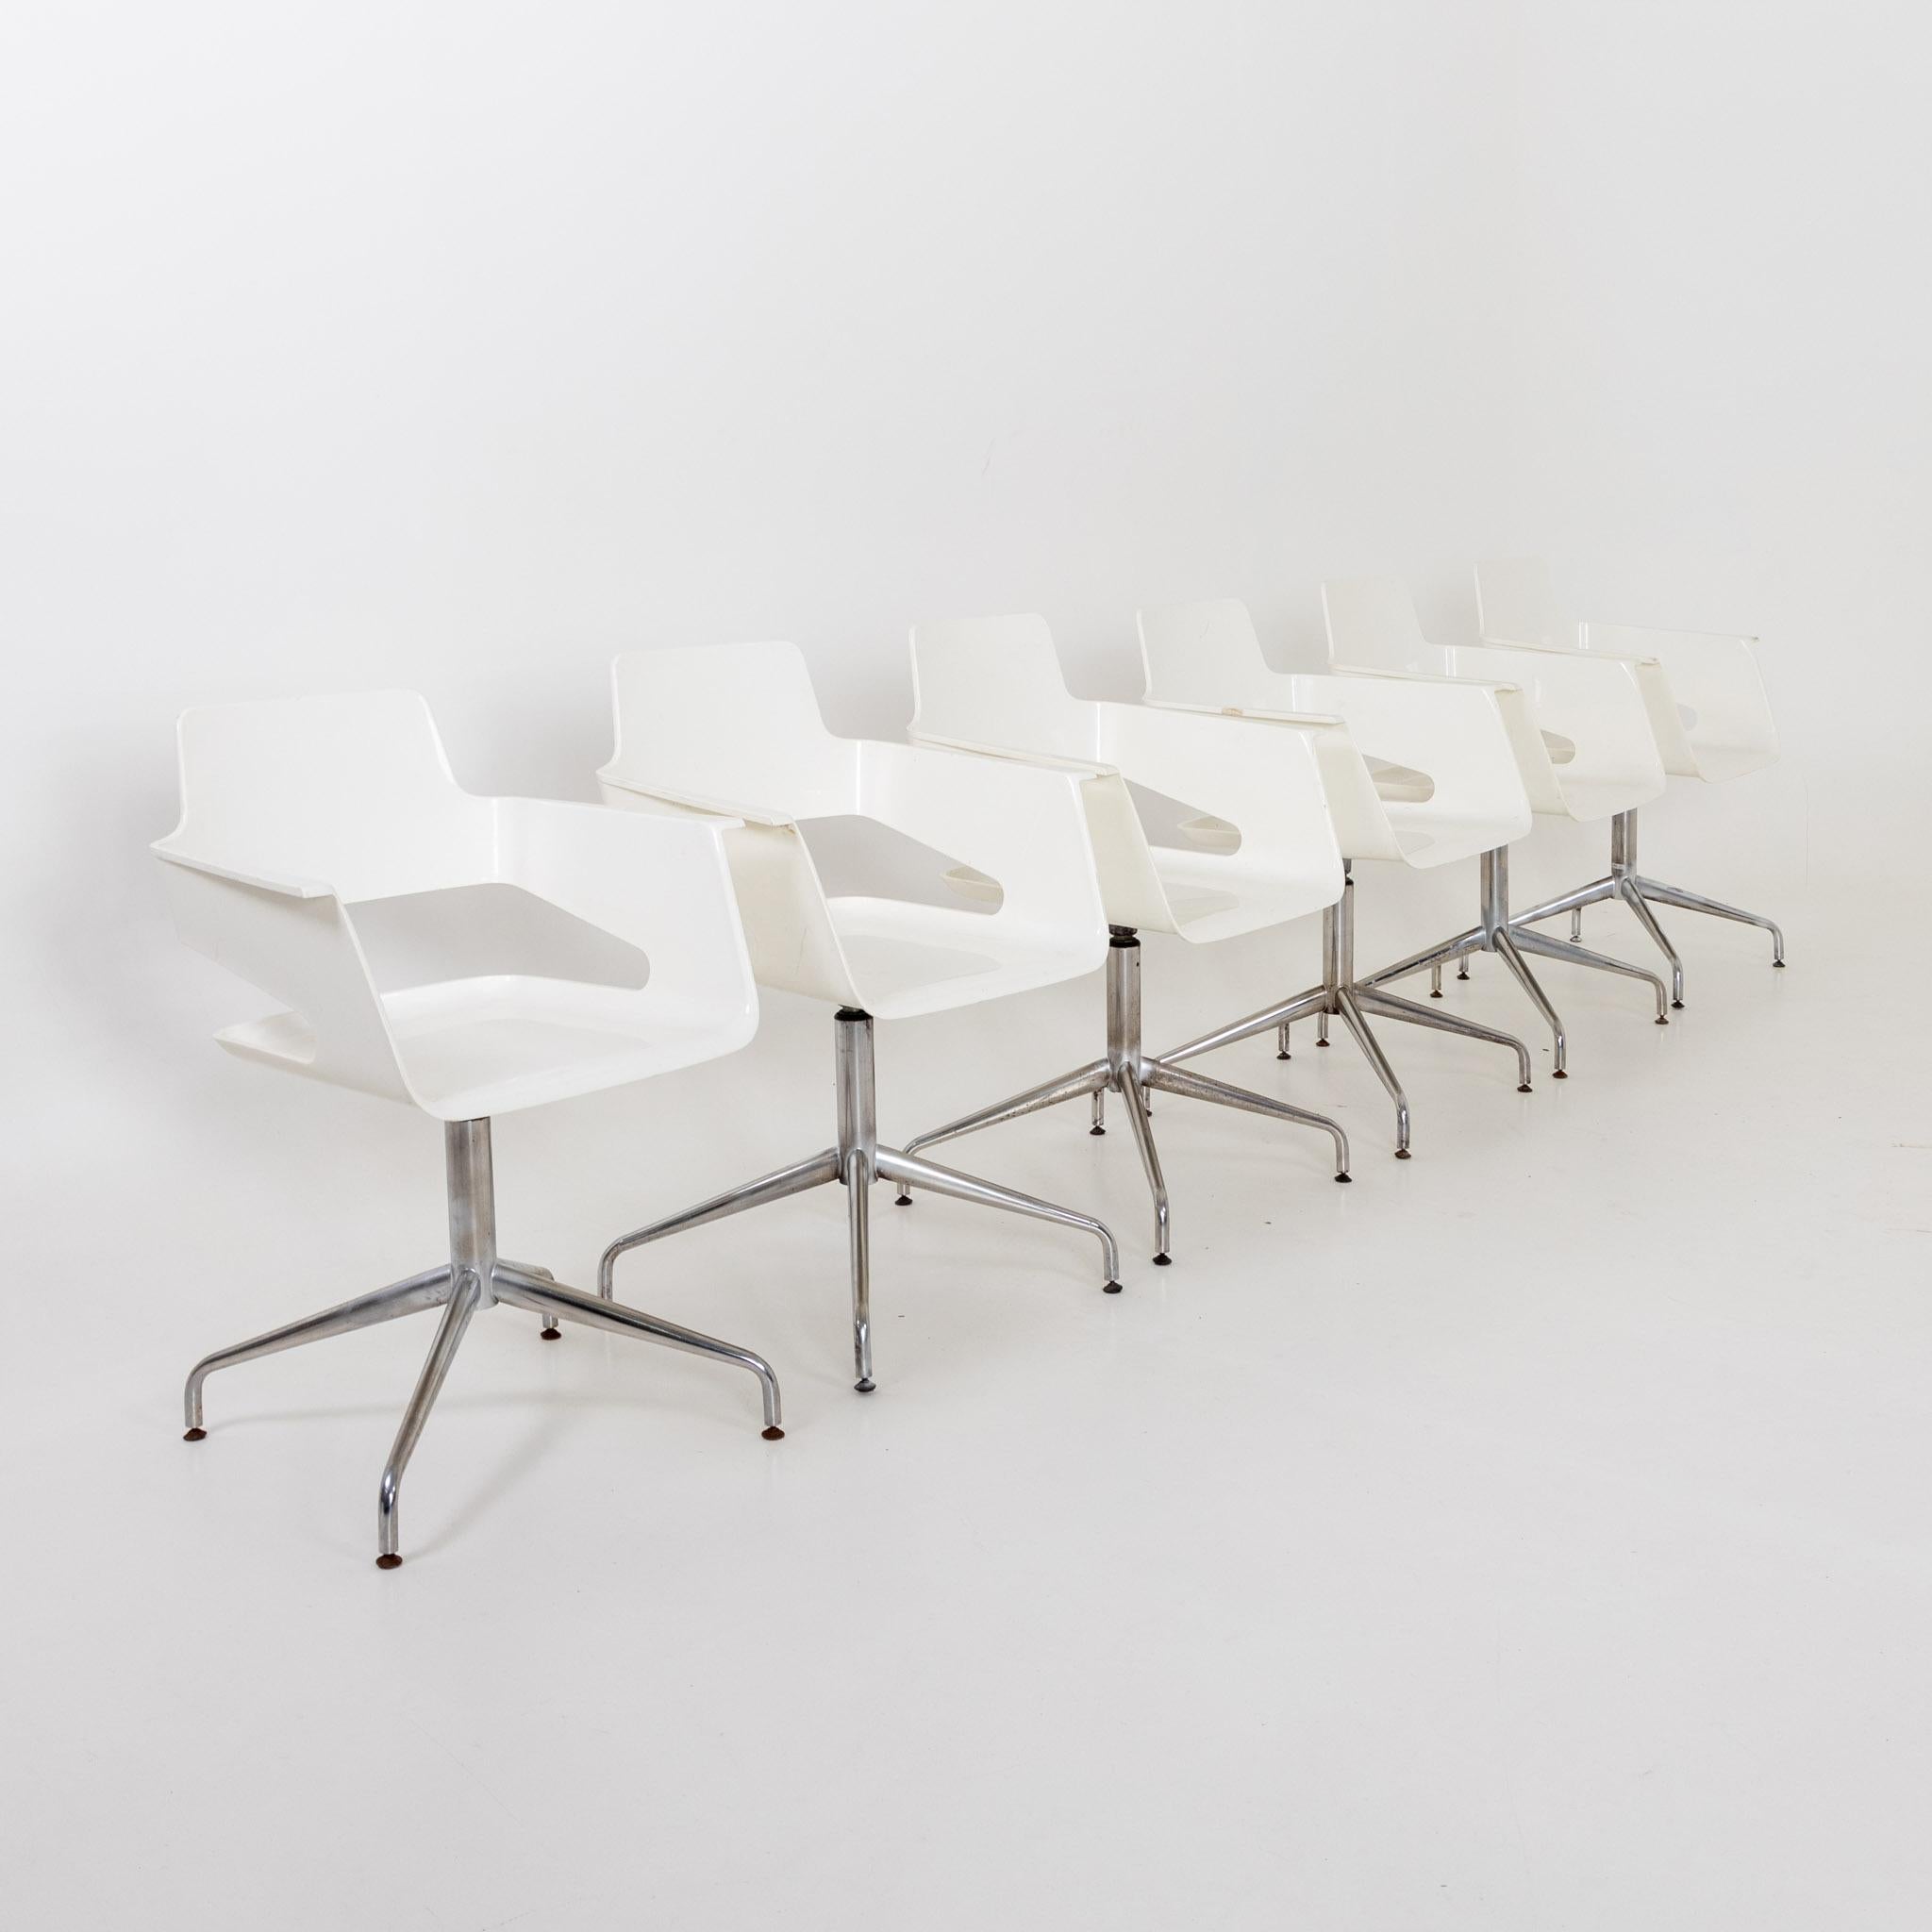 Set of ten Office Chairs, white and metal, 20th Century For Sale 1